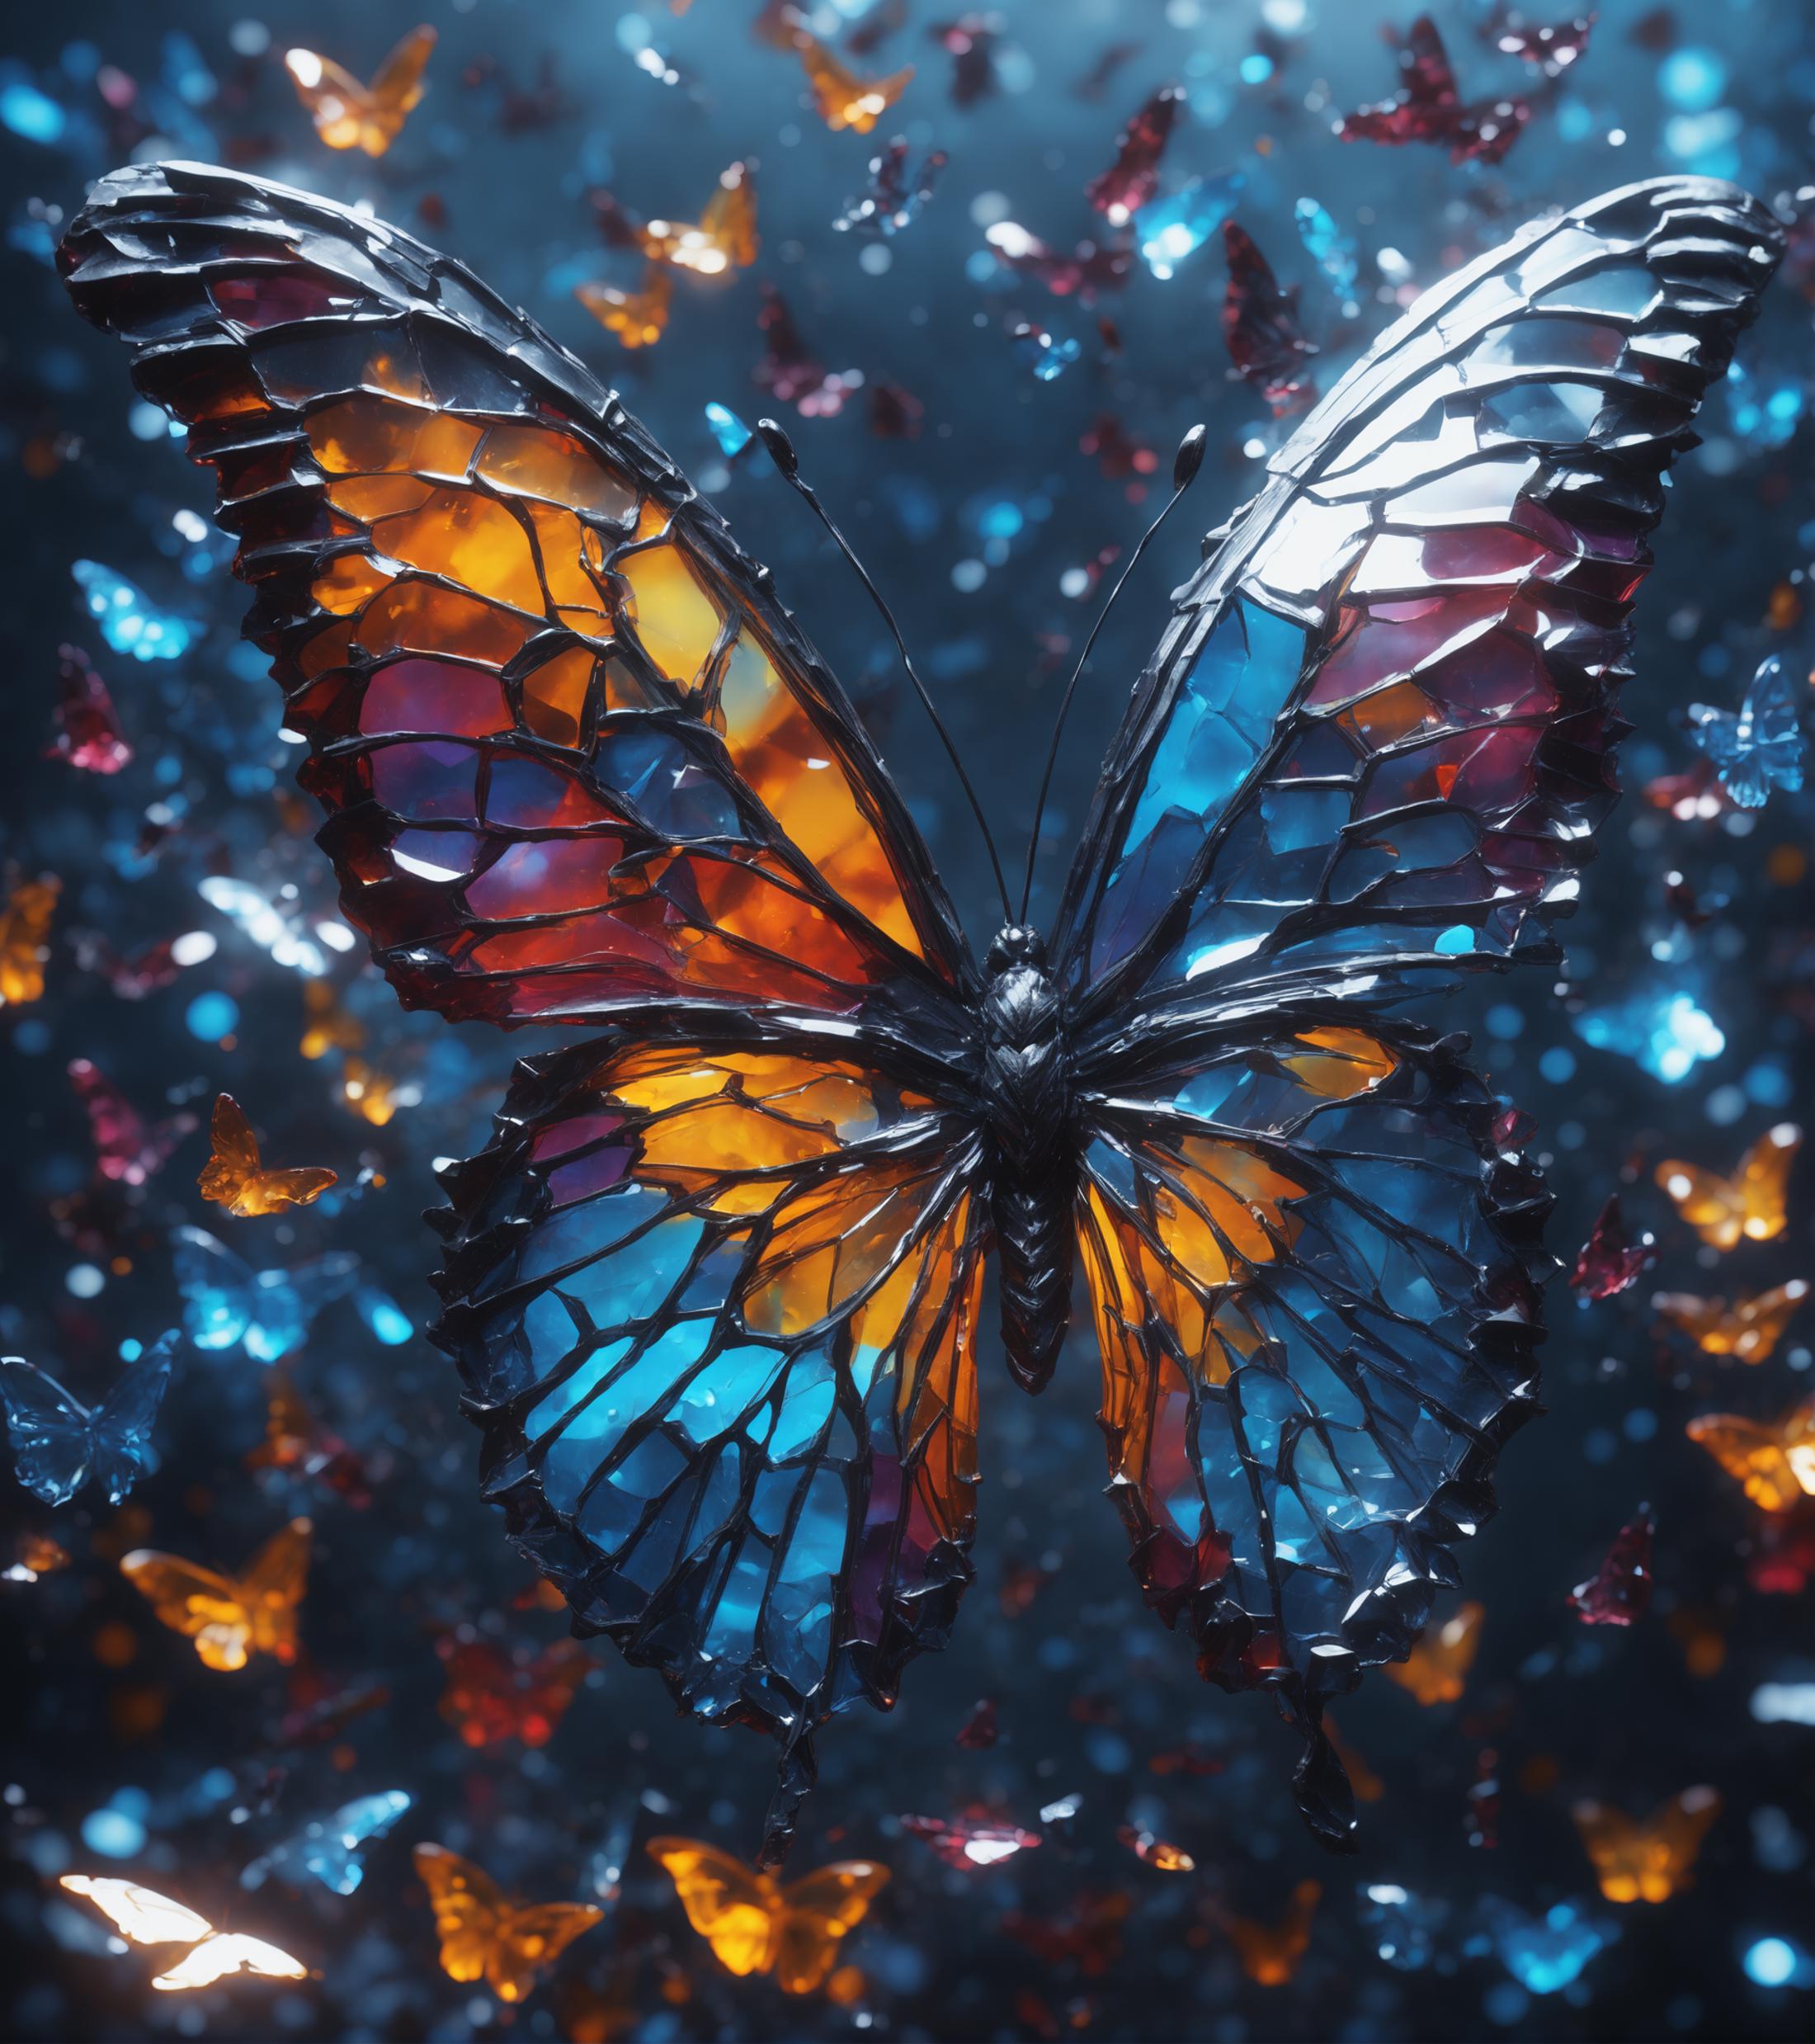 A Colorful Butterfly with Rainbow Wings and Blue Body Flying in the Sky